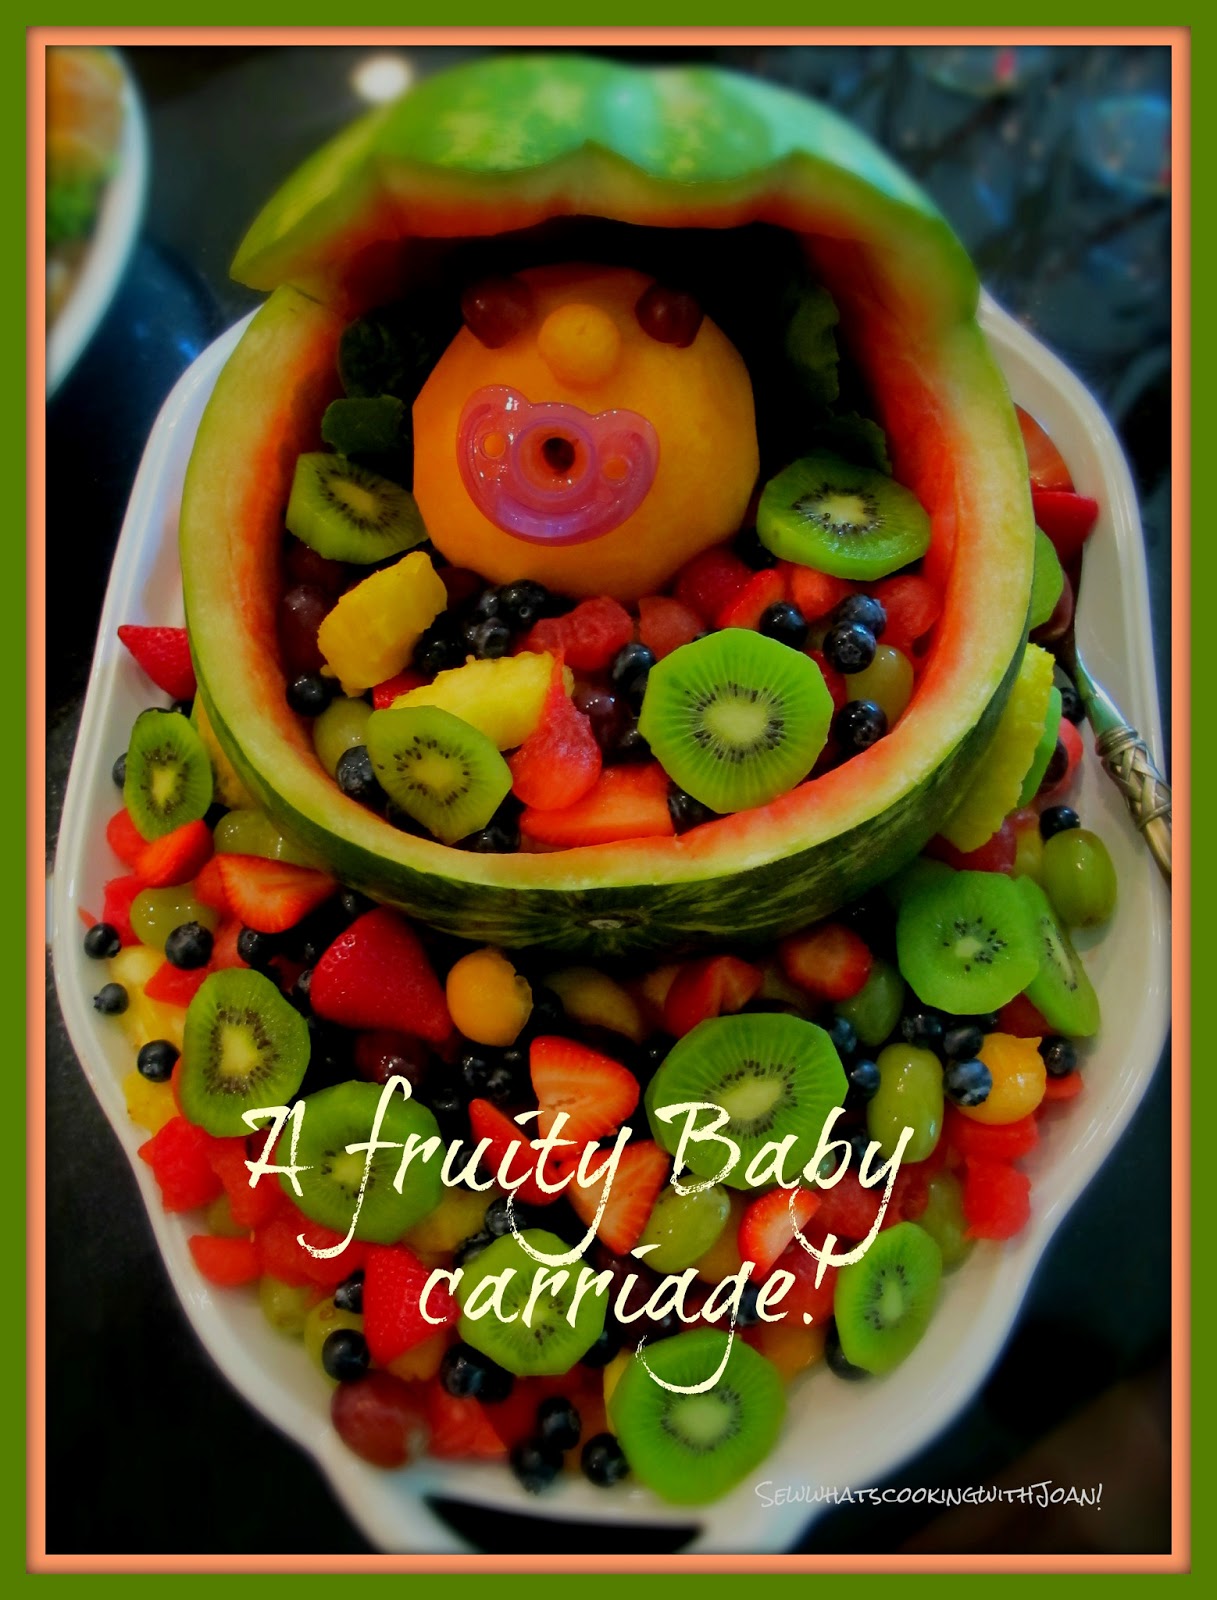 how to make a watermelon baby carriage with baby inside